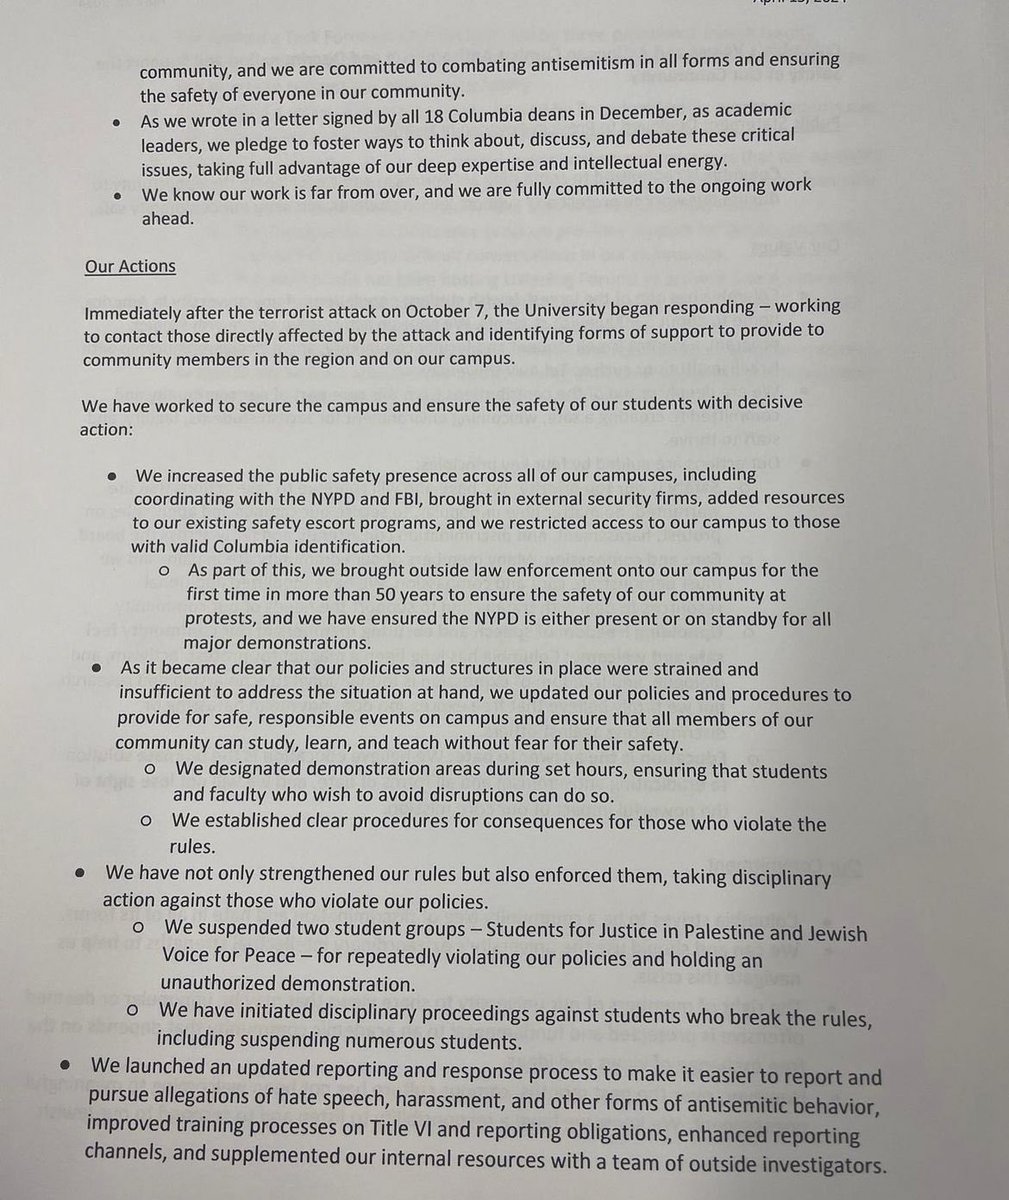 BREAKING: LEAKED PLAN from Columbia University administration for the congressional hearing tmrw. President Minouche Shafik will be testifying. Columbia admin touts the suspension of students & brags about having NYPD on campus.